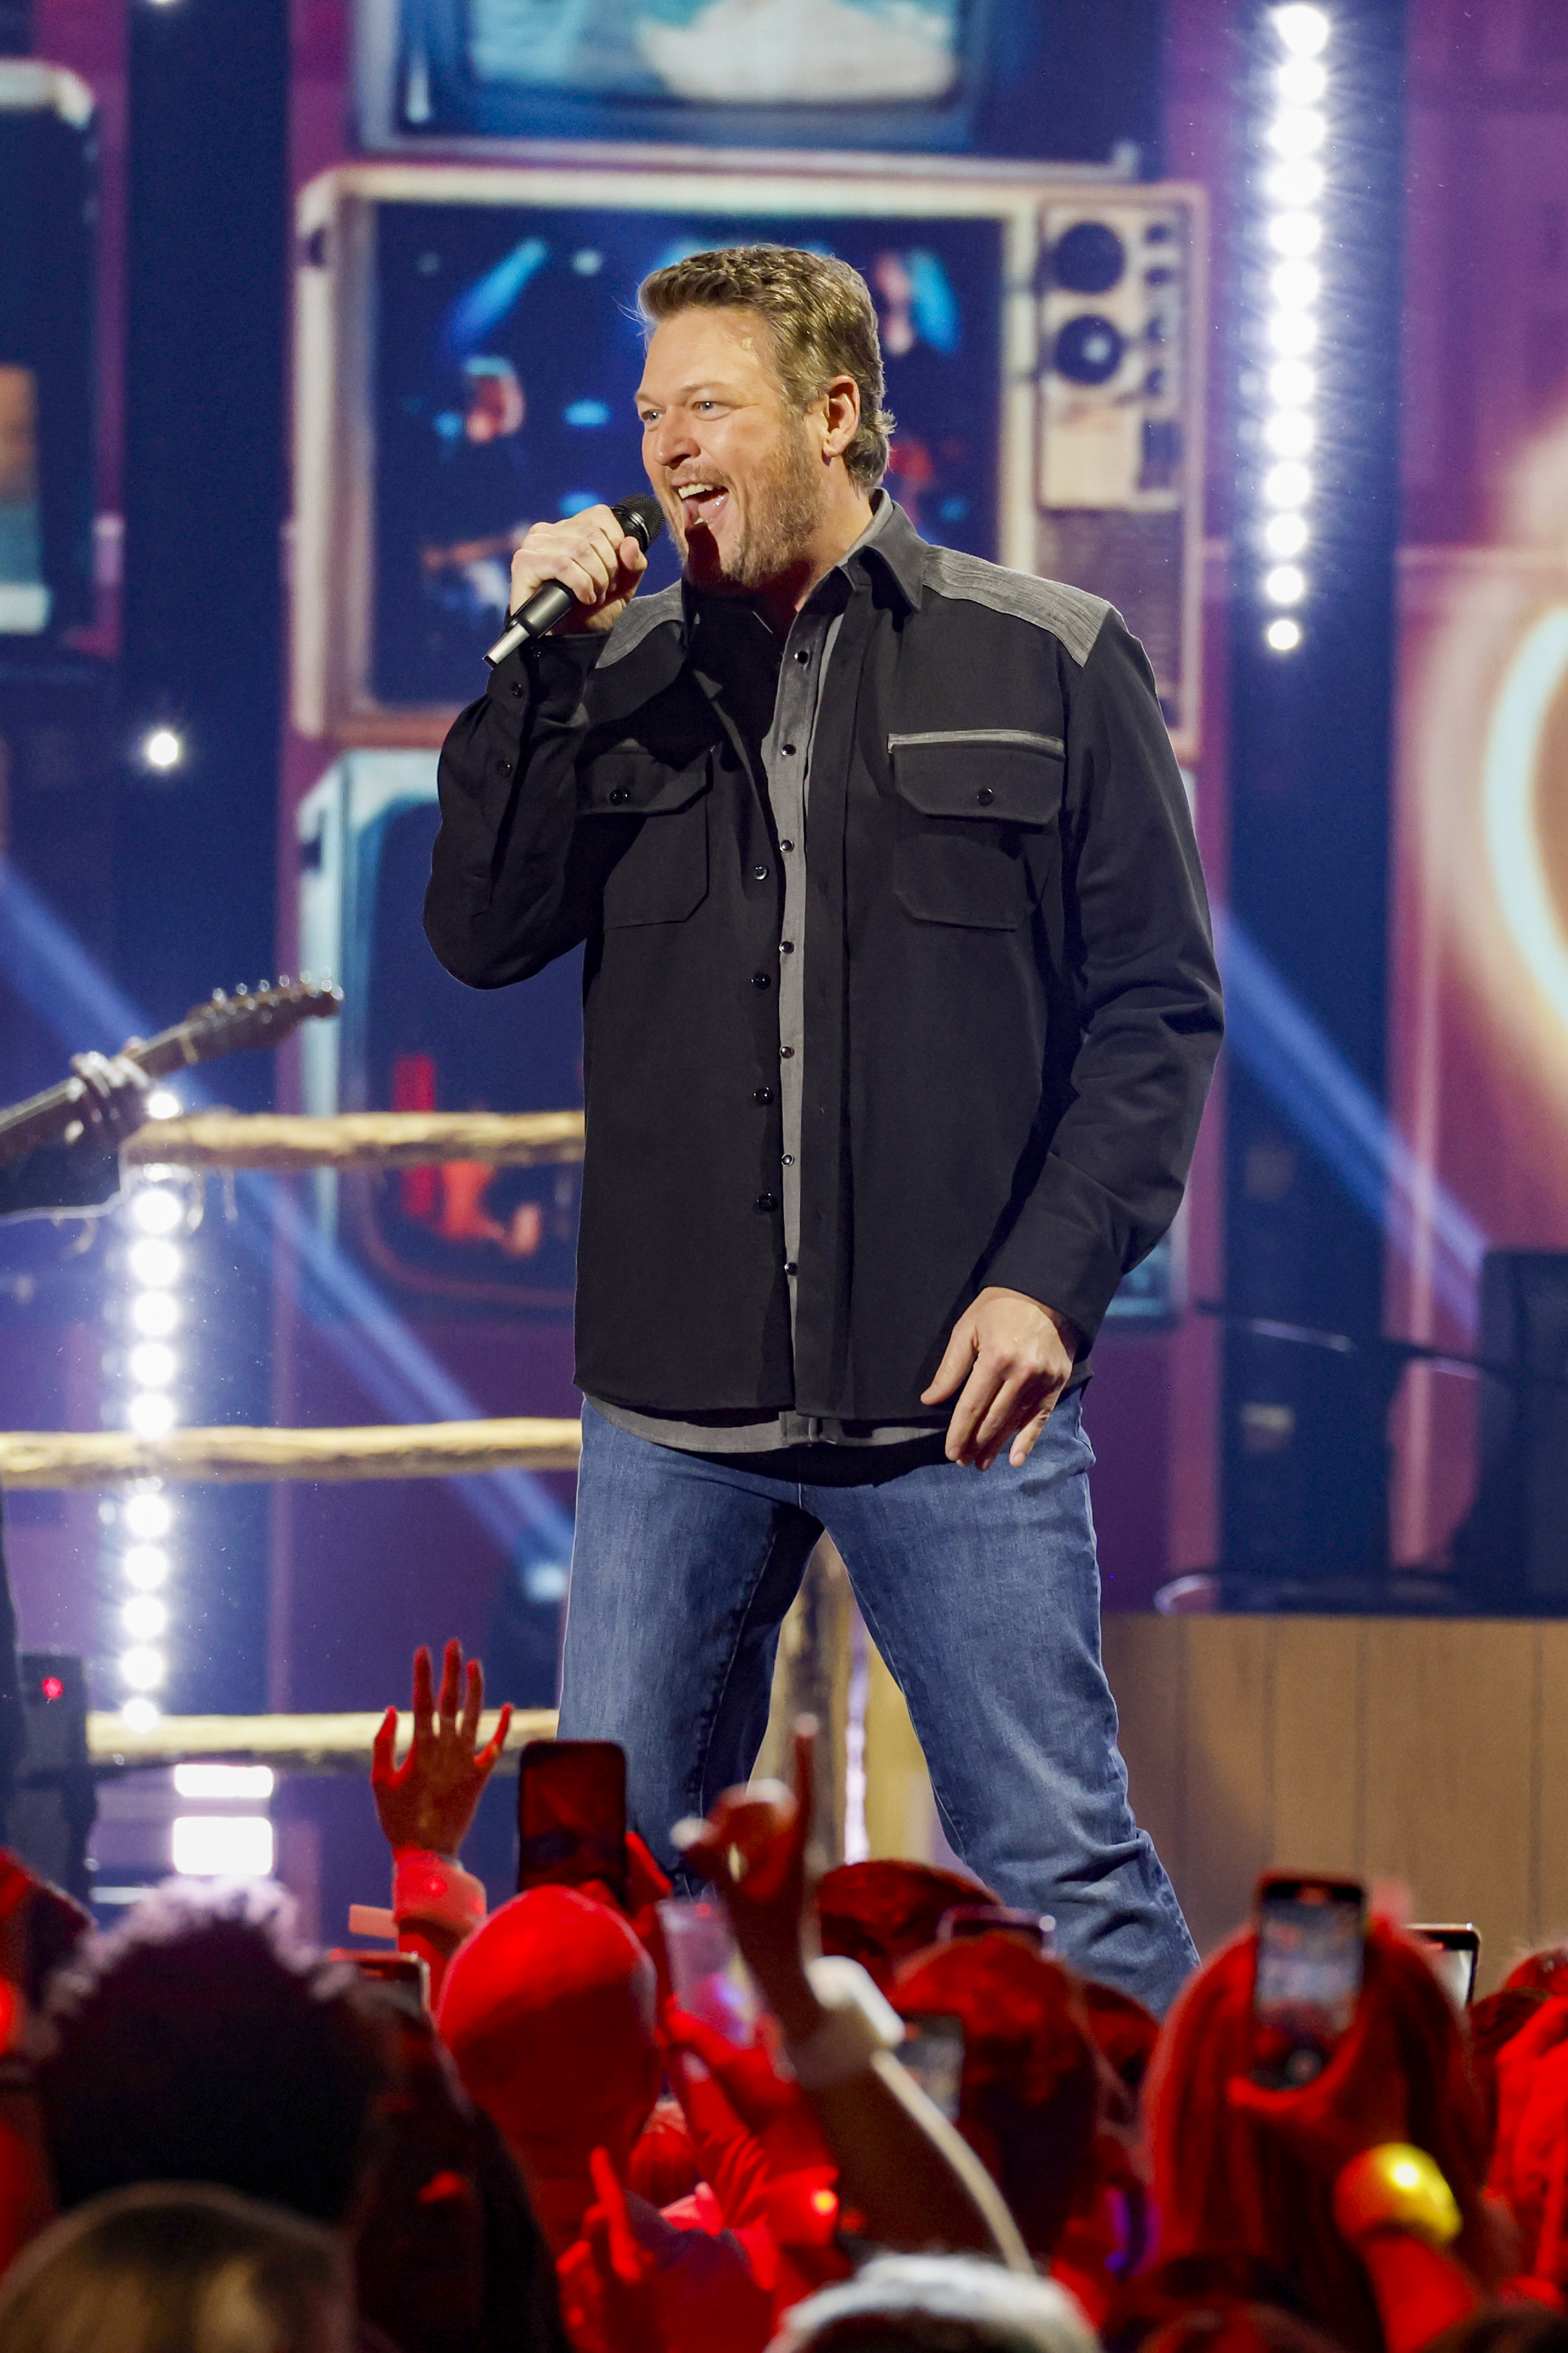 A source close to Blake's inner circle revealed that he is plotting a music competition show to rival The Voice